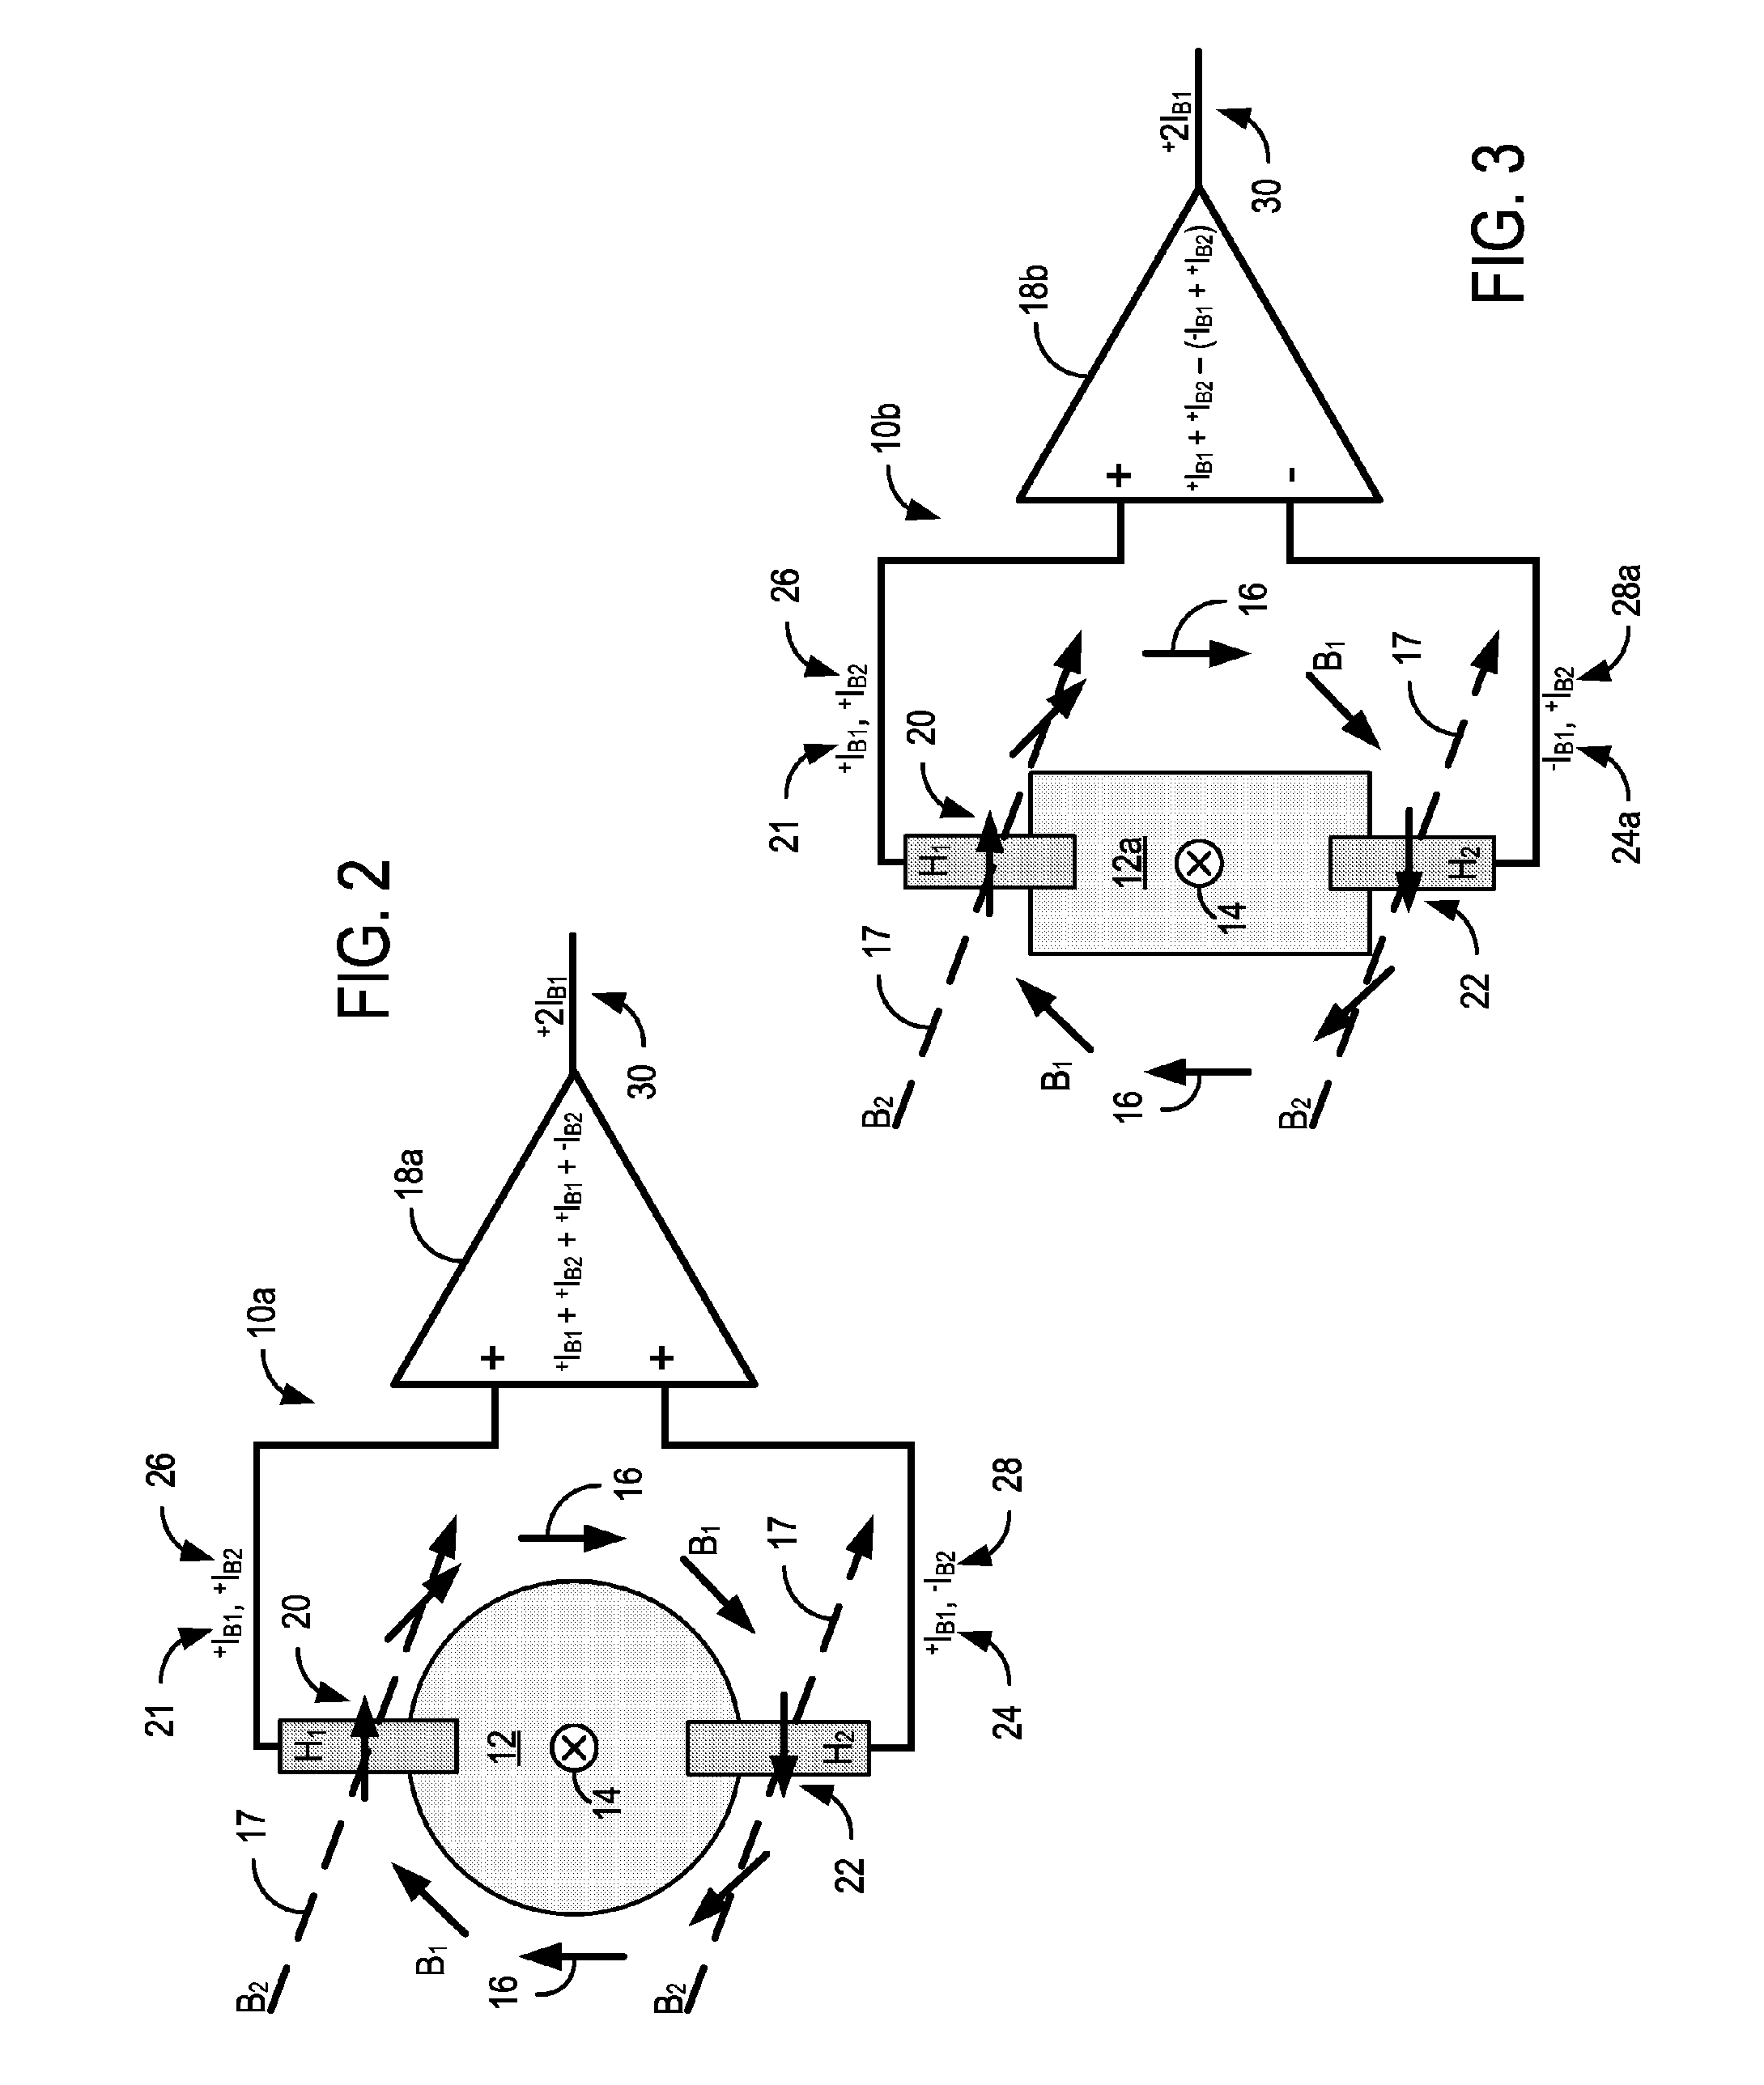 System and method for current sensing using Anti-differential, error correcting current sensing